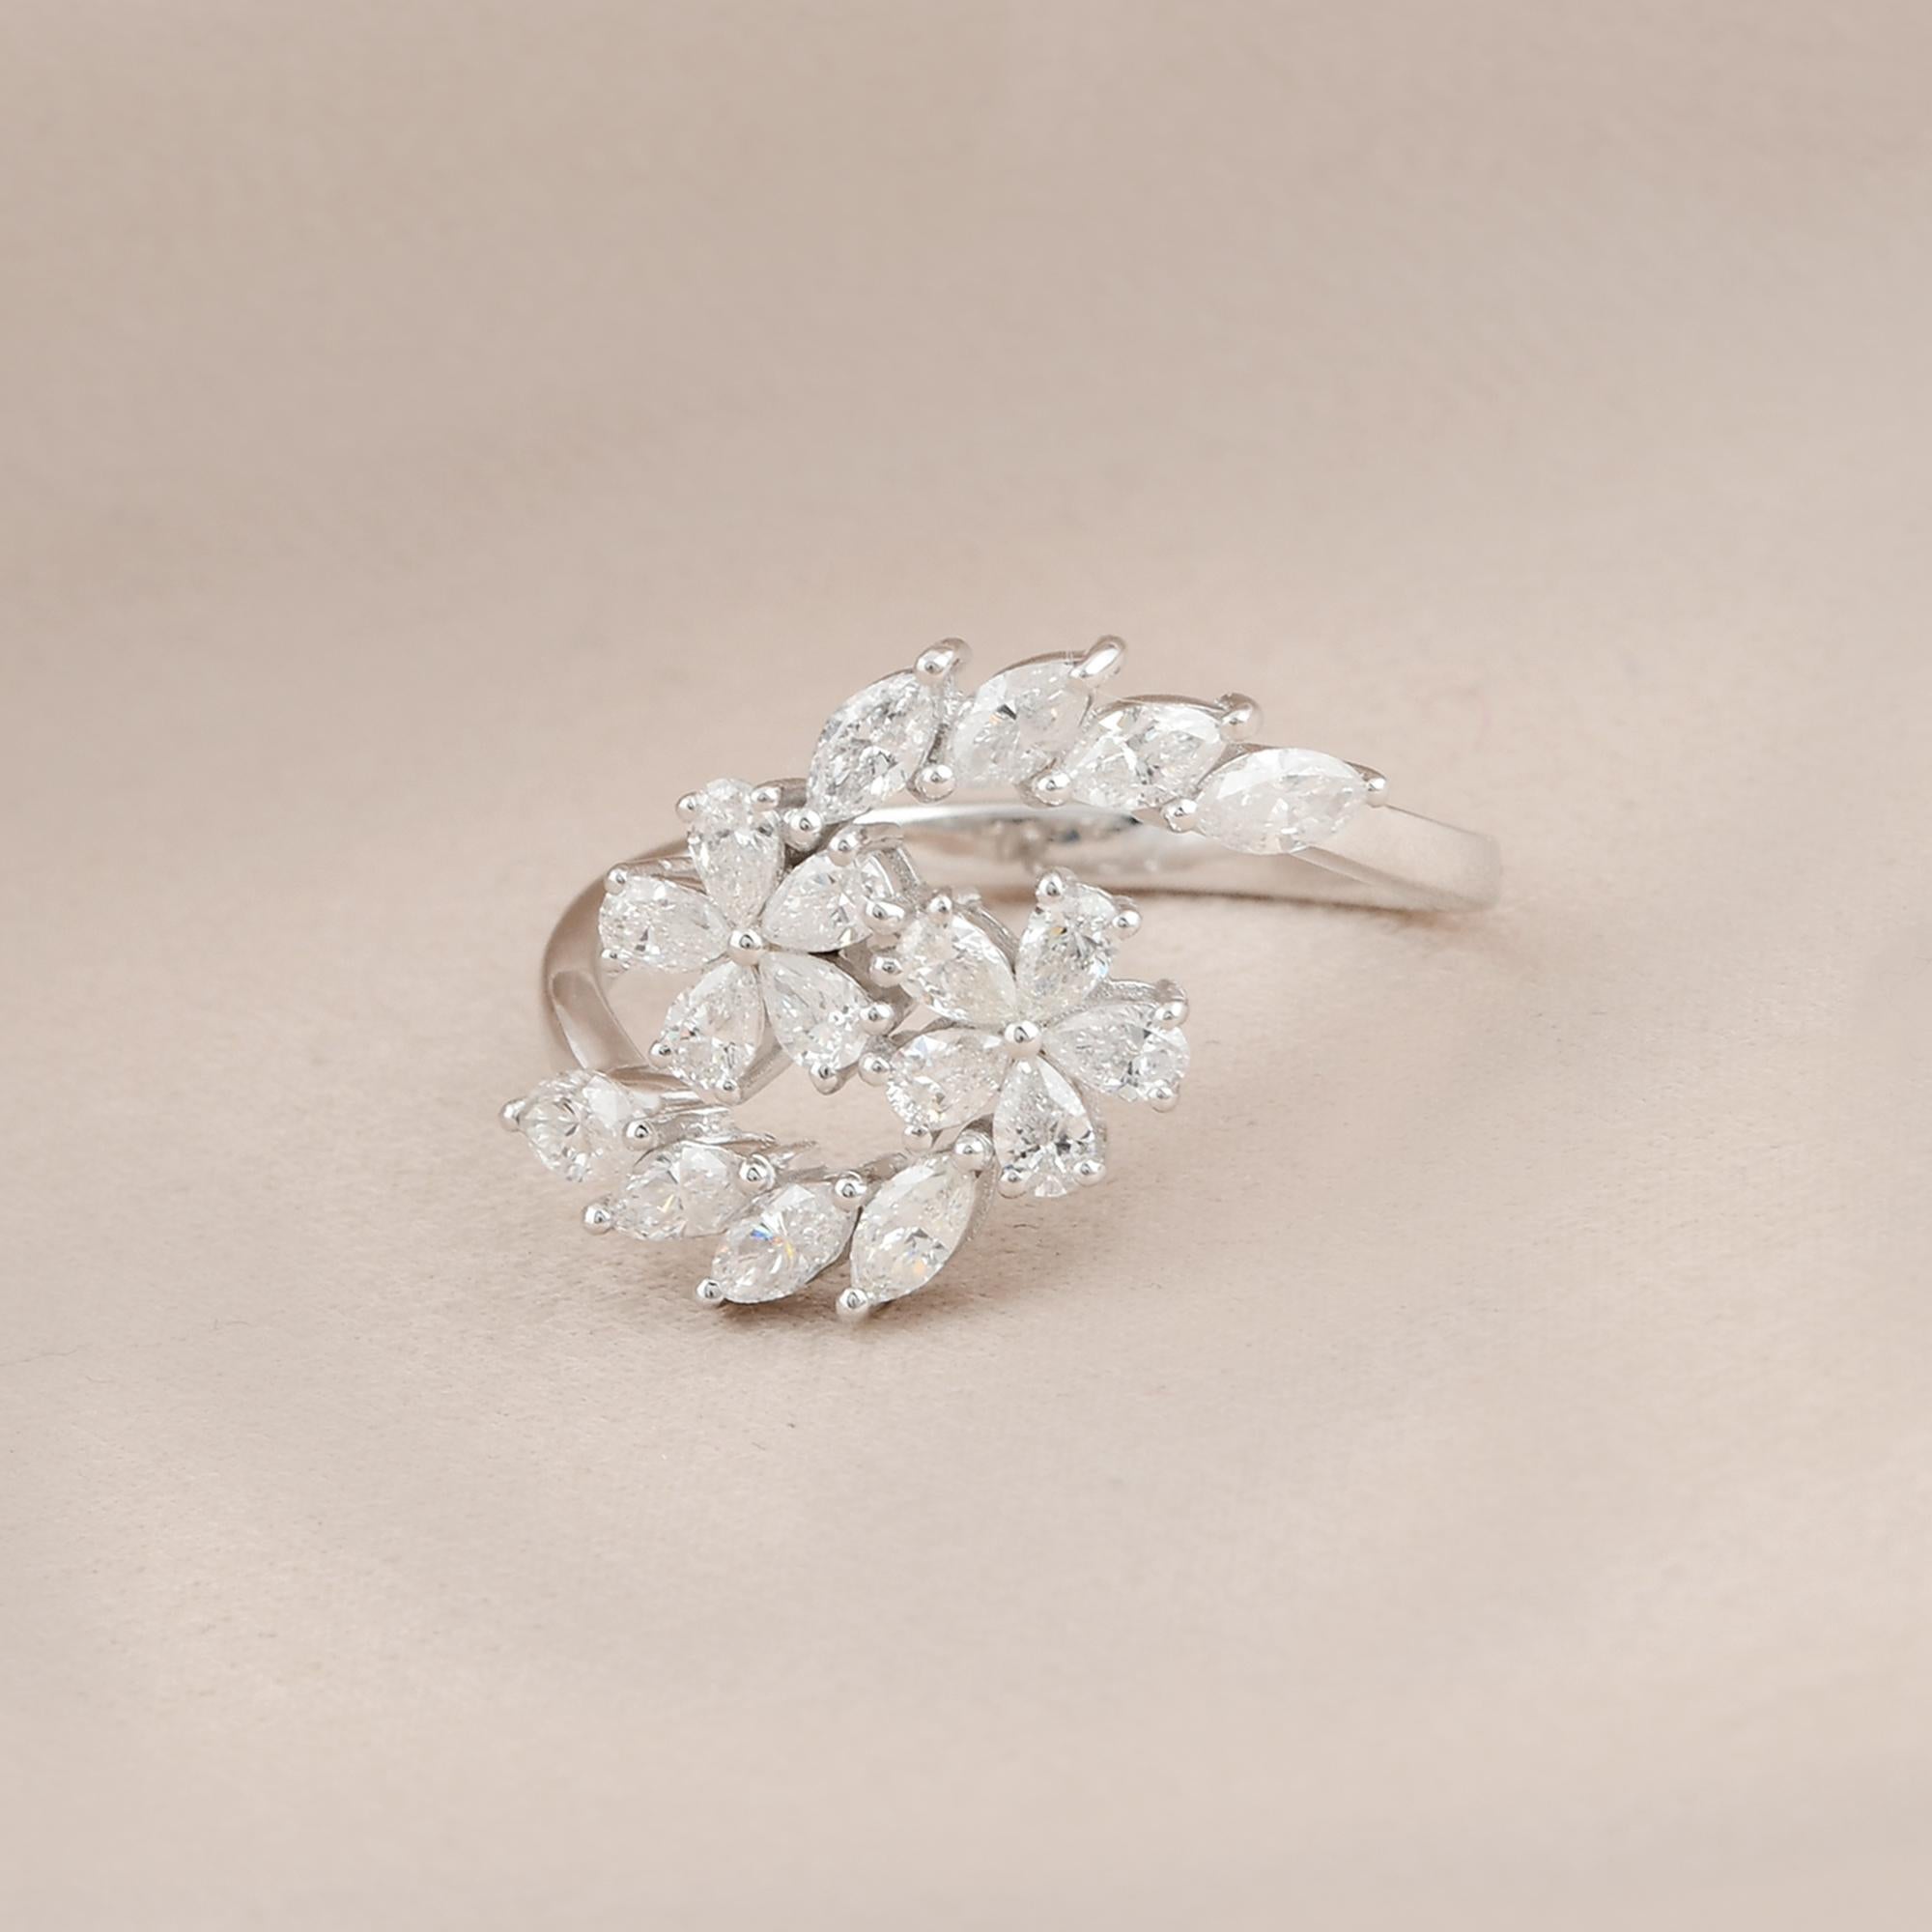 For Sale:  1 Carat Pear & Marquise Diamond Flower Ring 18 Karat White Gold Fine Jewelry 4